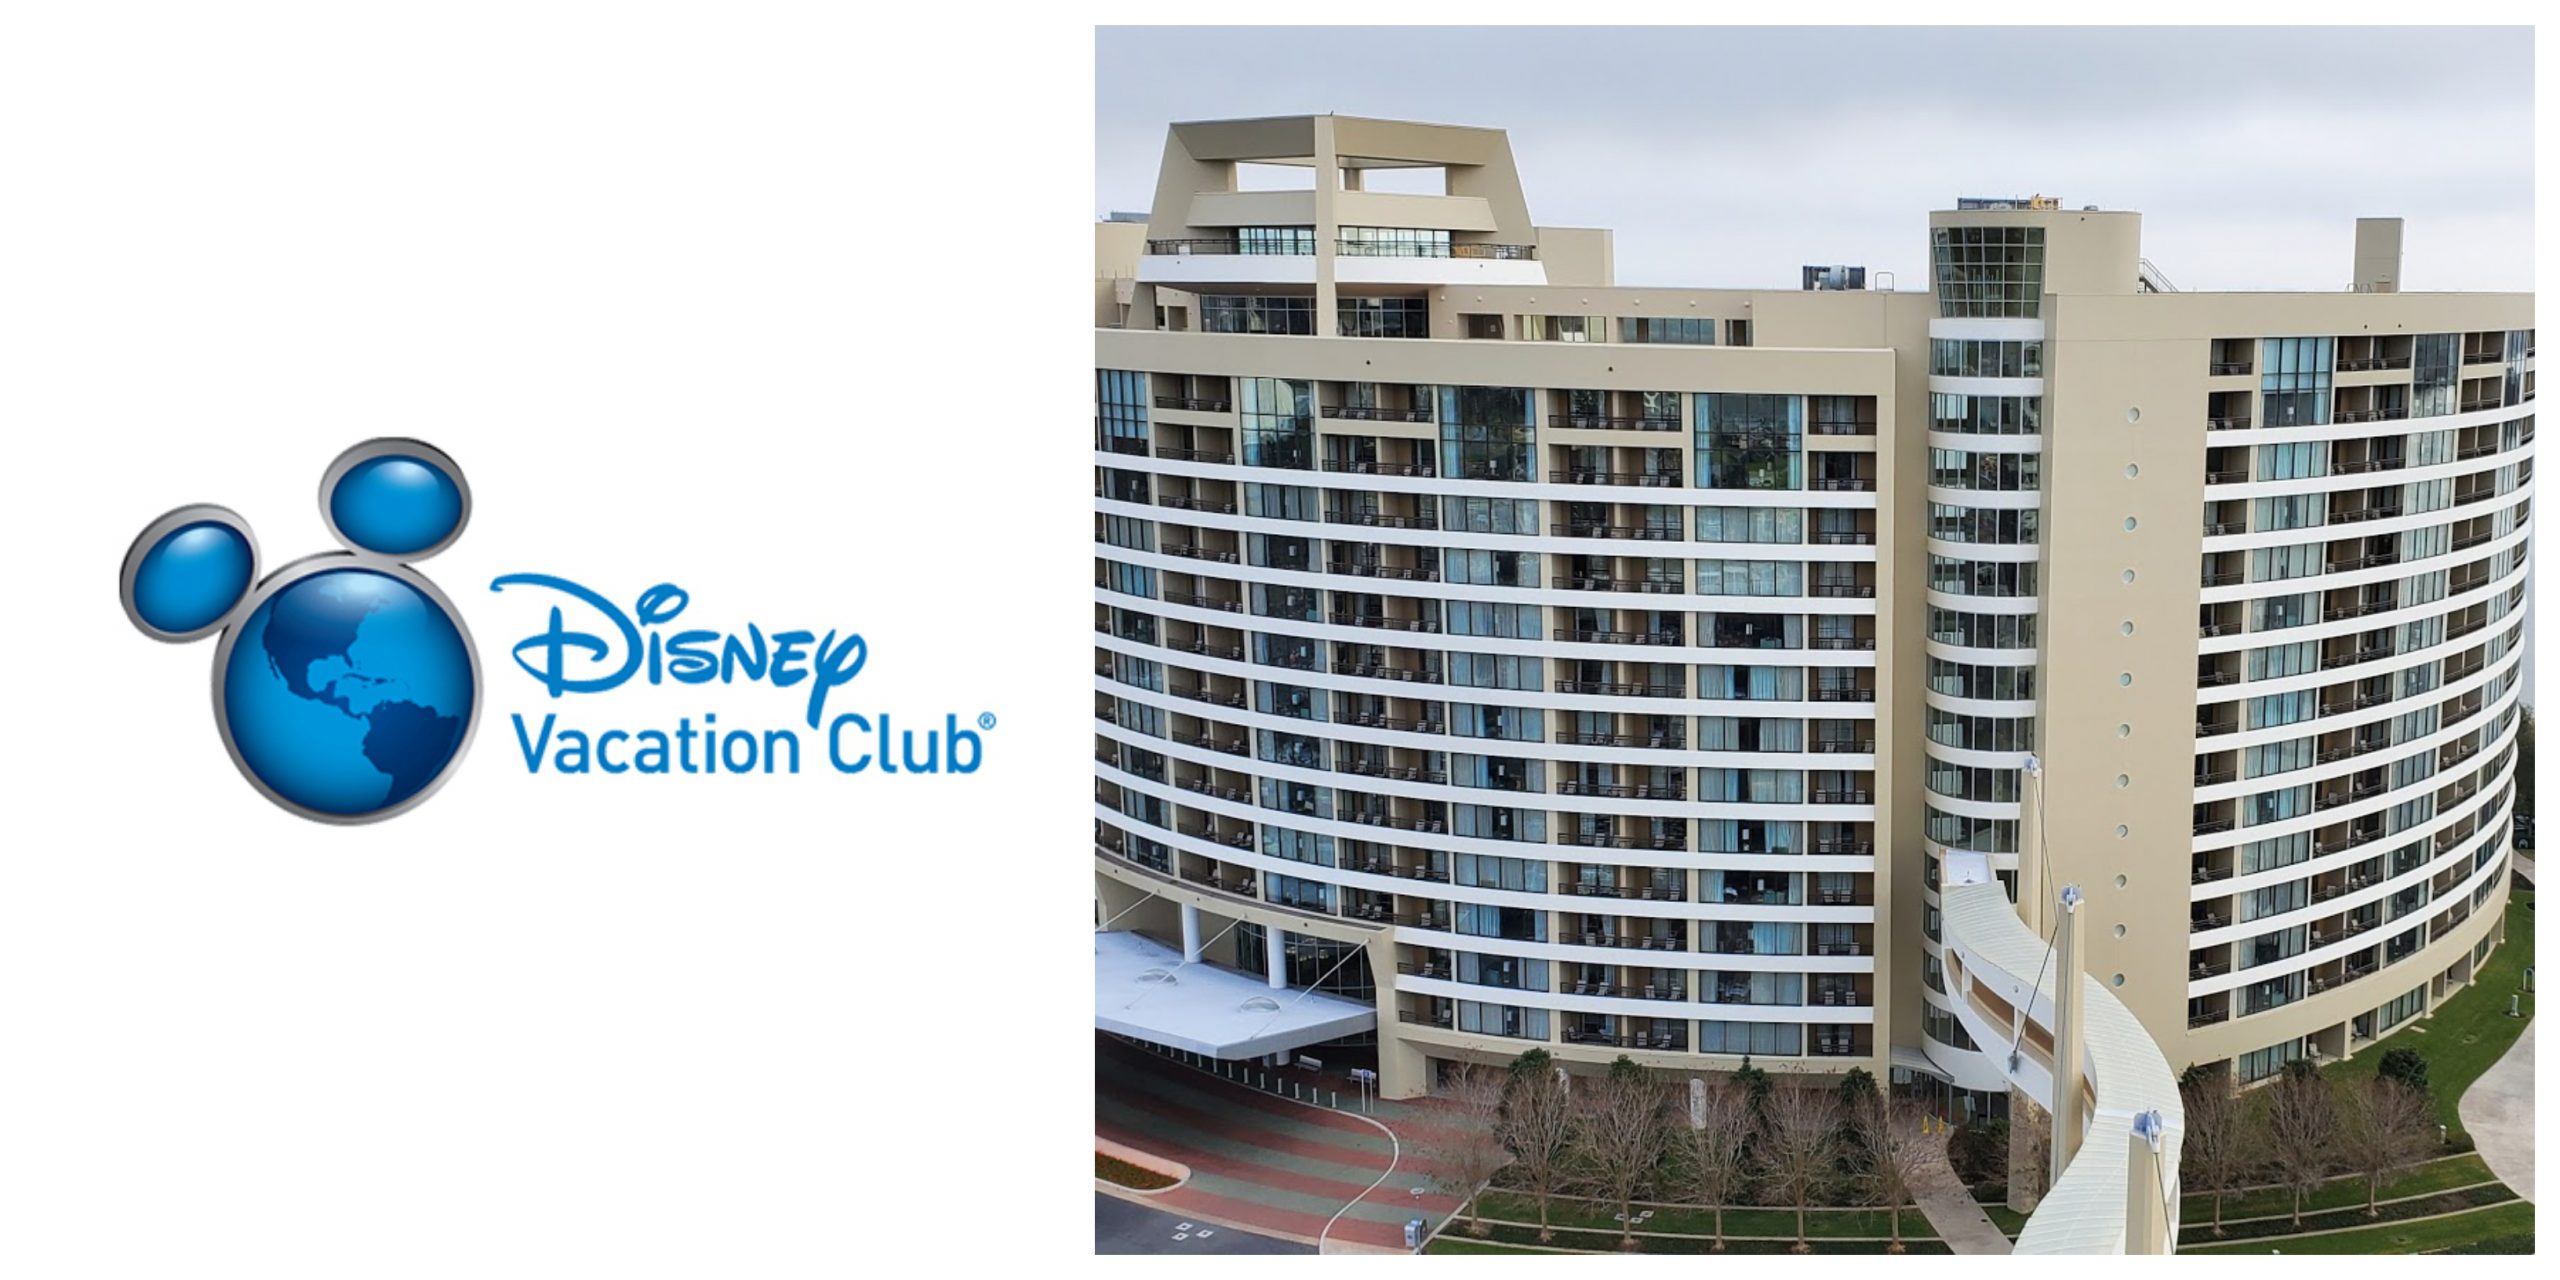 Disney Vacation Club now requiring a minimum of 150 points for membership extras